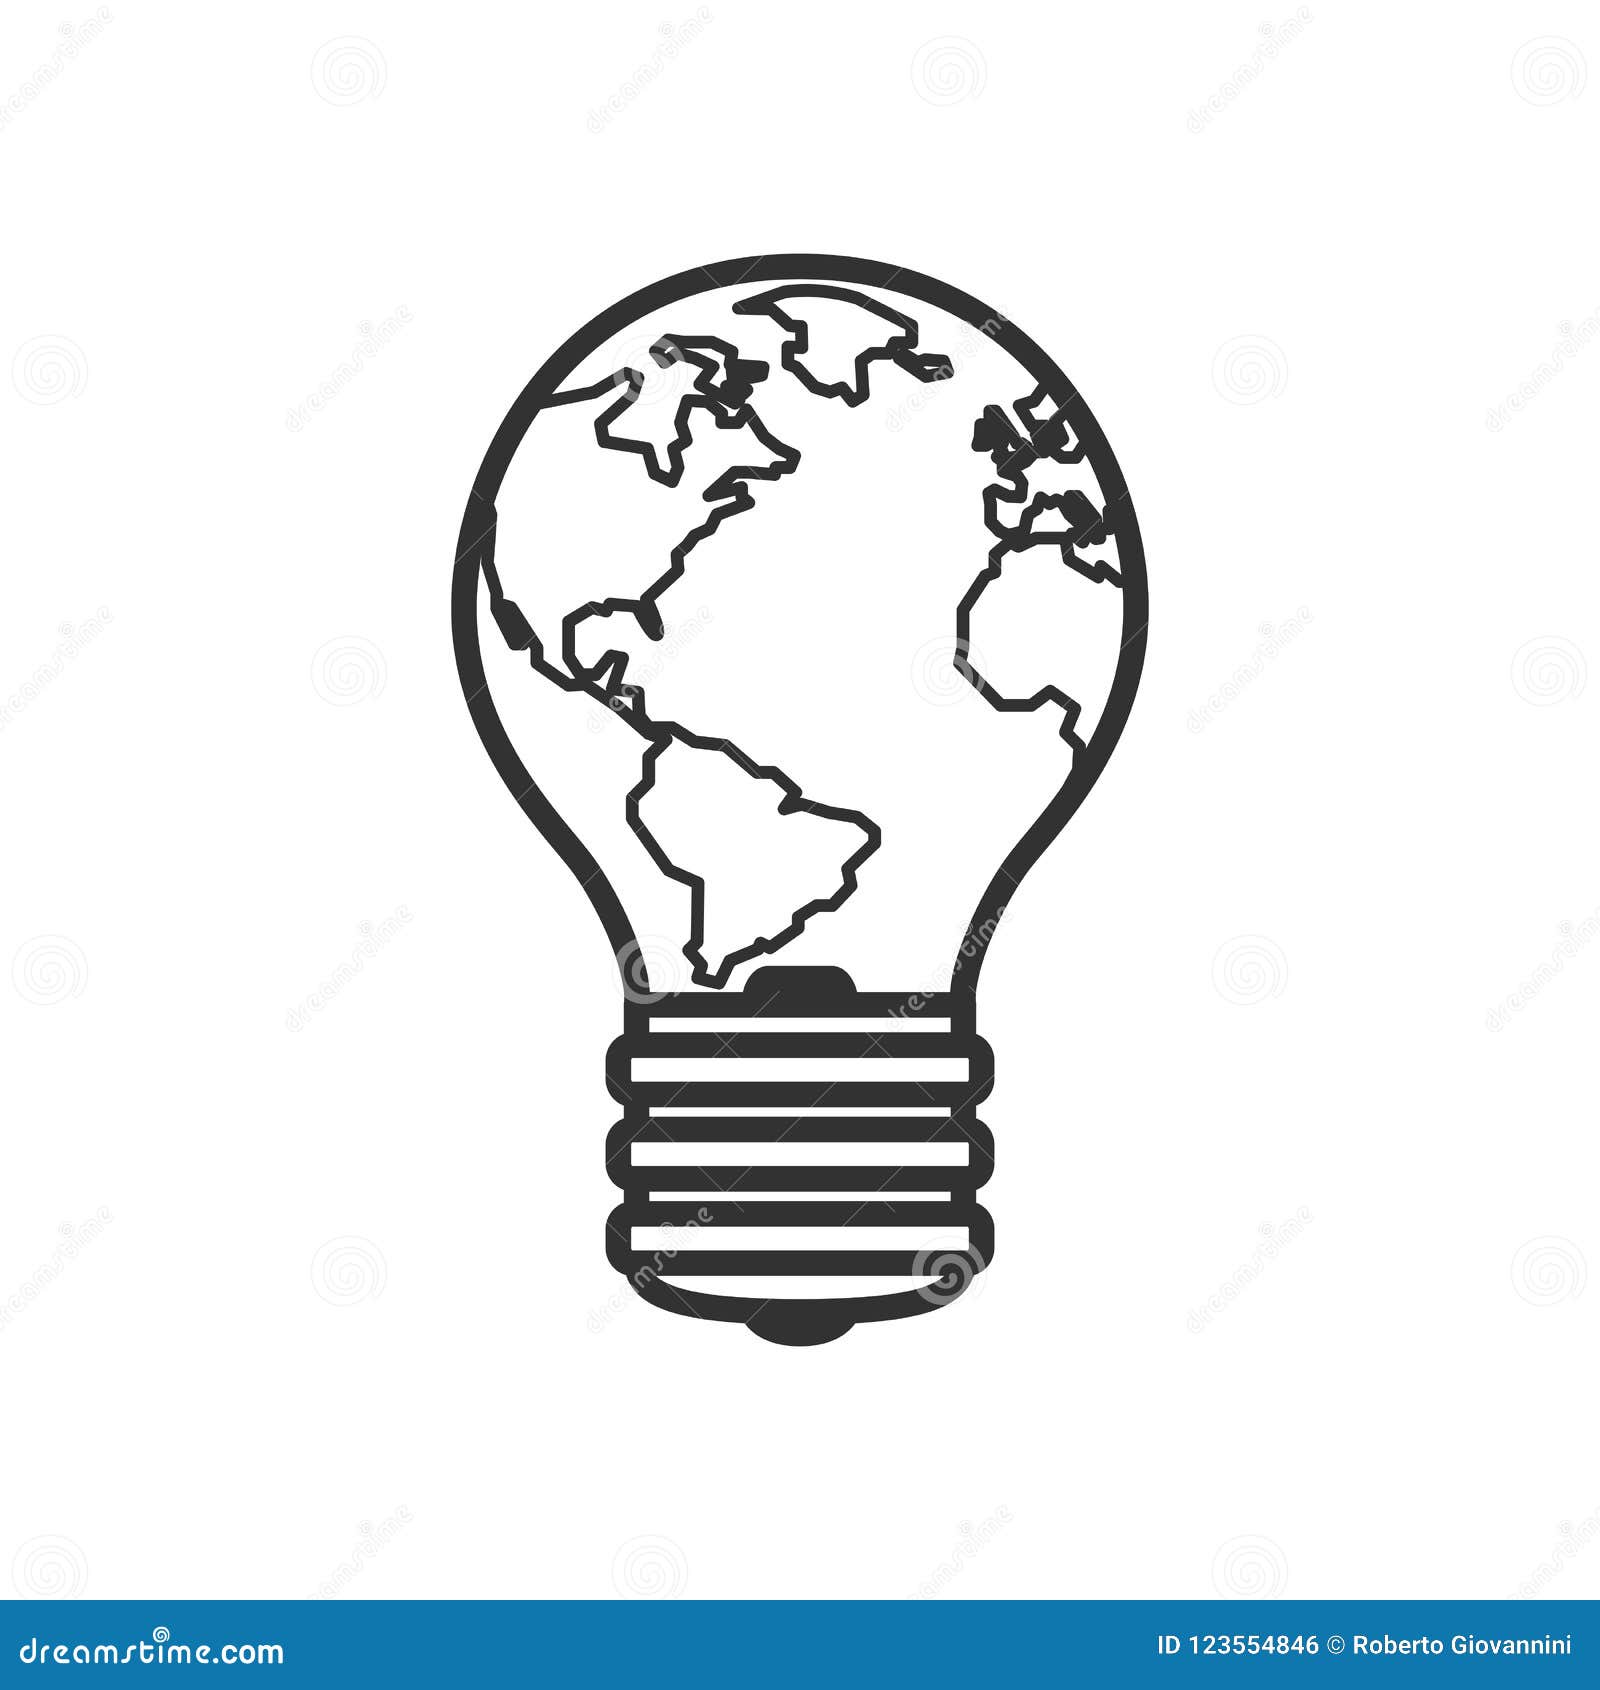 Light Bulb with Planet Earth Outline Icon Stock Vector - Illustration of environmental, modern: 123554846